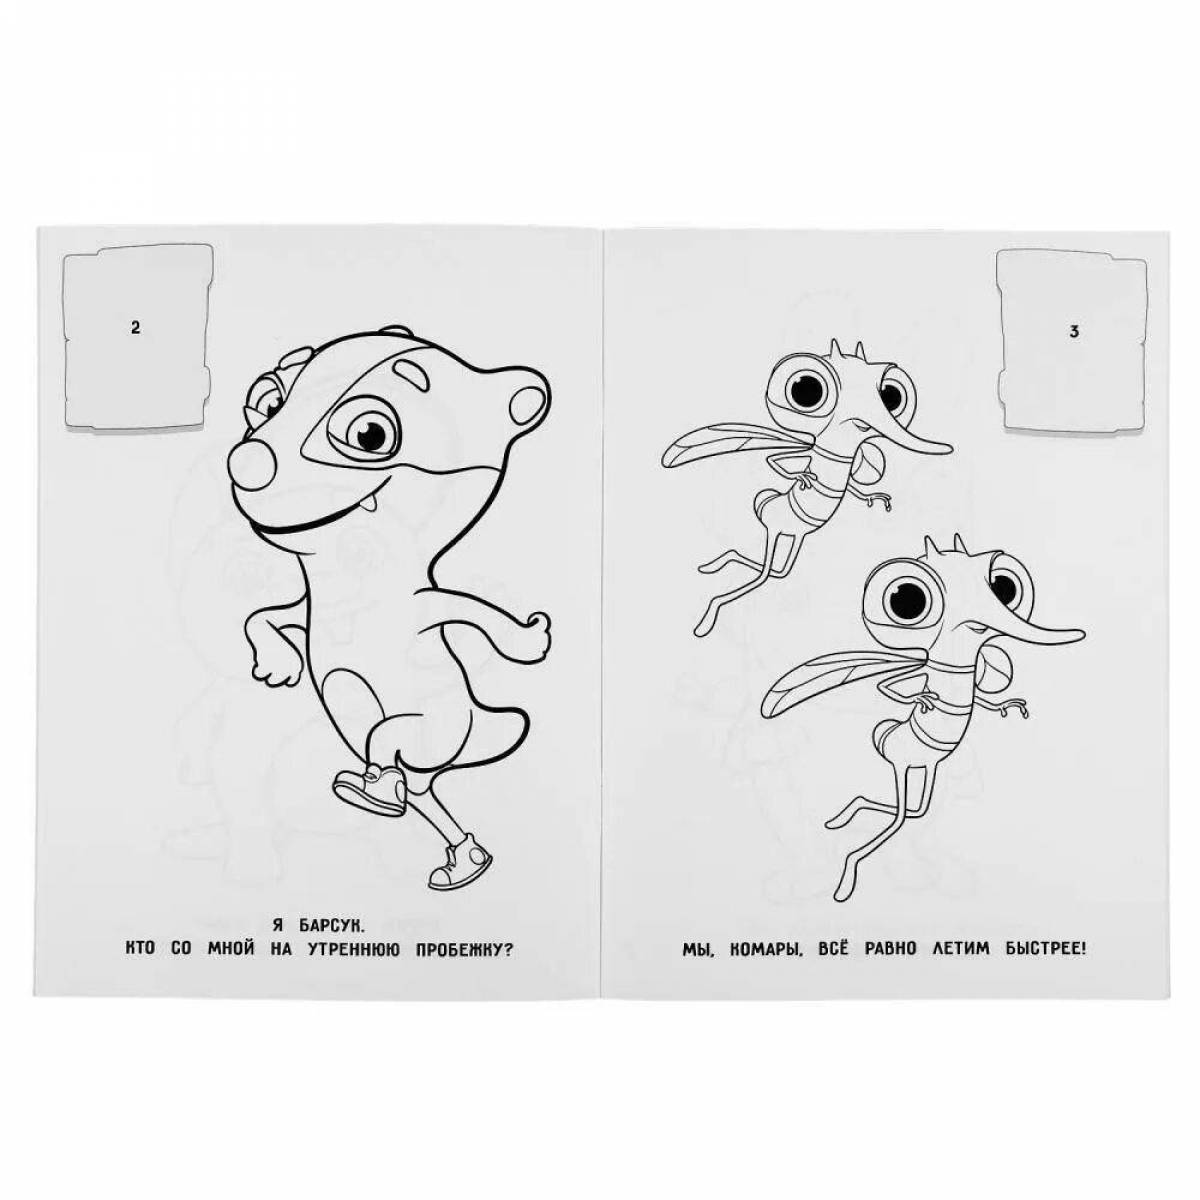 Funny beaver coloring book